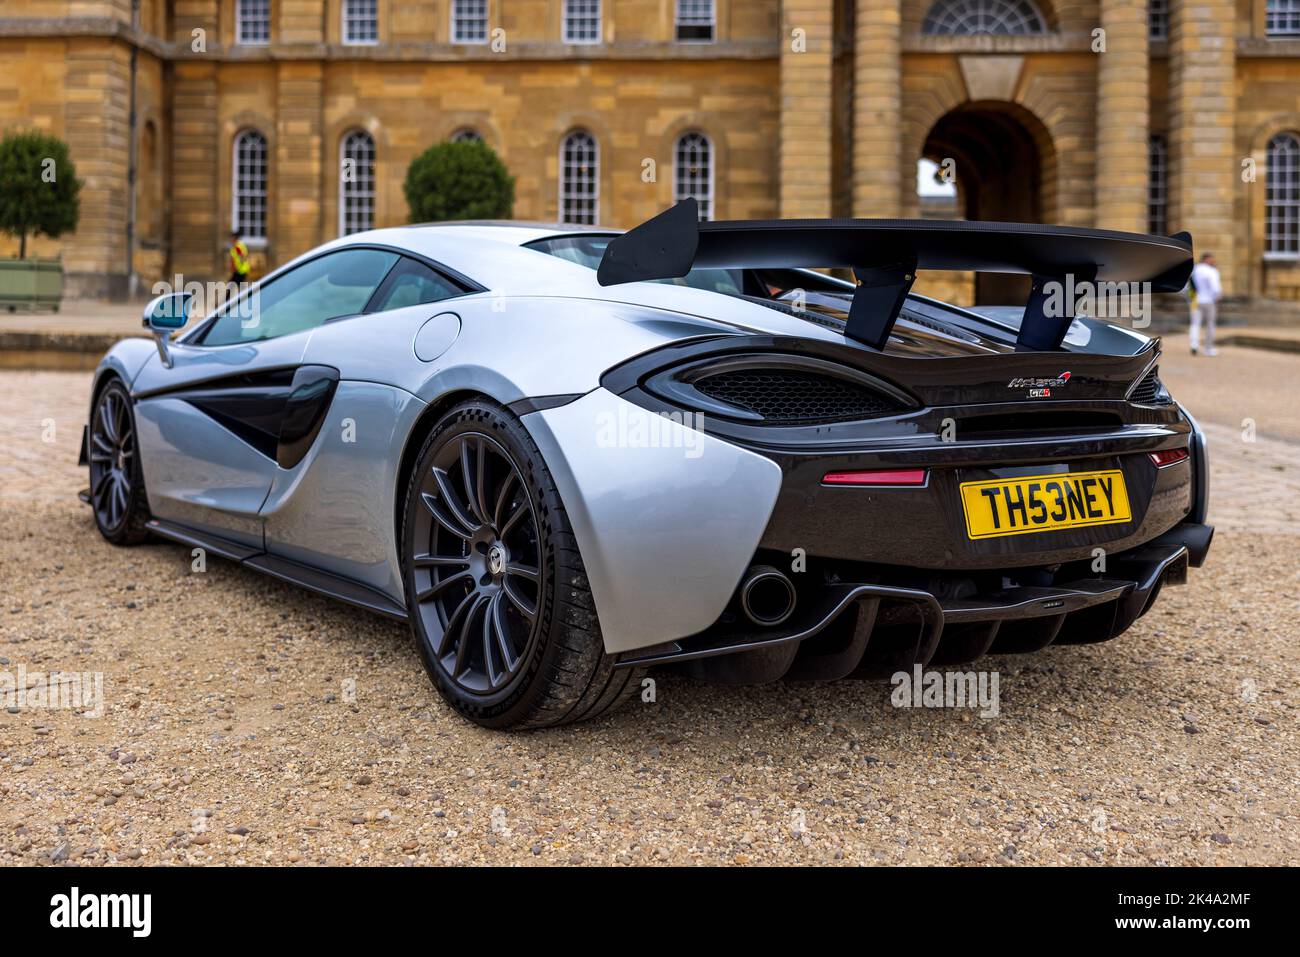 McLaren 570S GT4 ‘TH53 NEY’ on display in the Great Court at Blenheim Palace on the 4th September 2022 Stock Photo